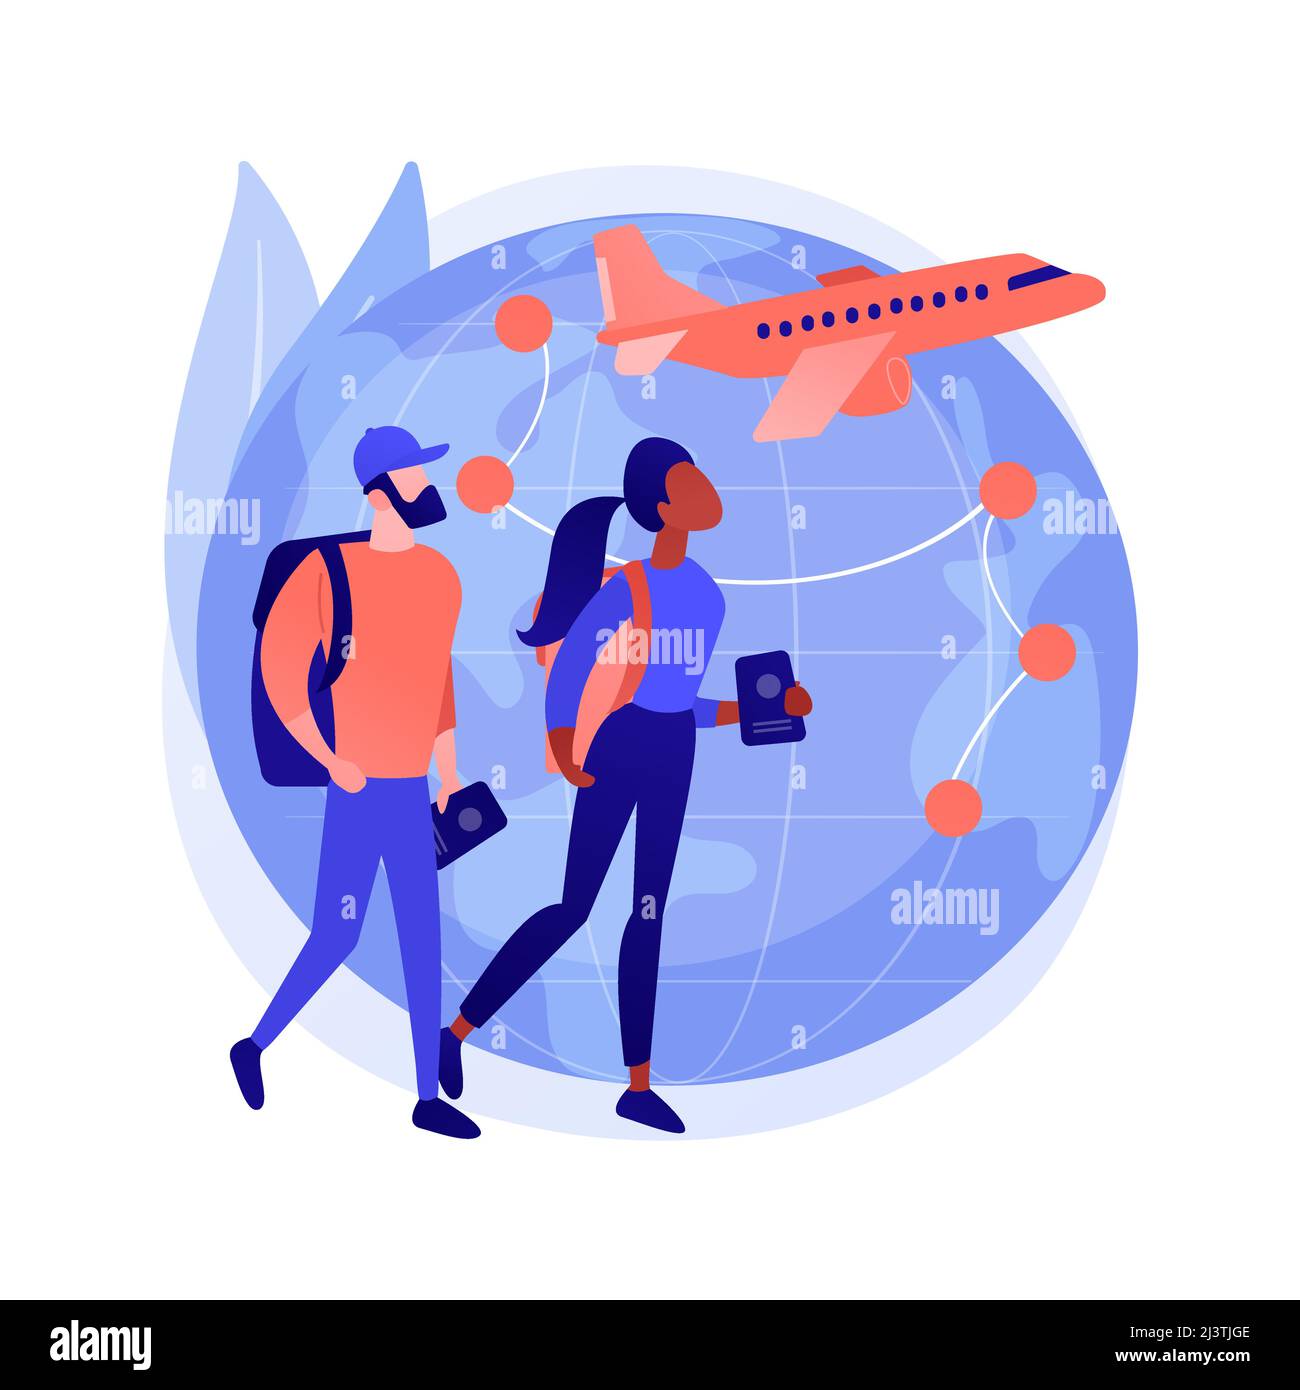 Global travelling abstract concept vector illustration. Global insurance, world trip, international tourism, travel agency, working holiday, luxury va Stock Vector